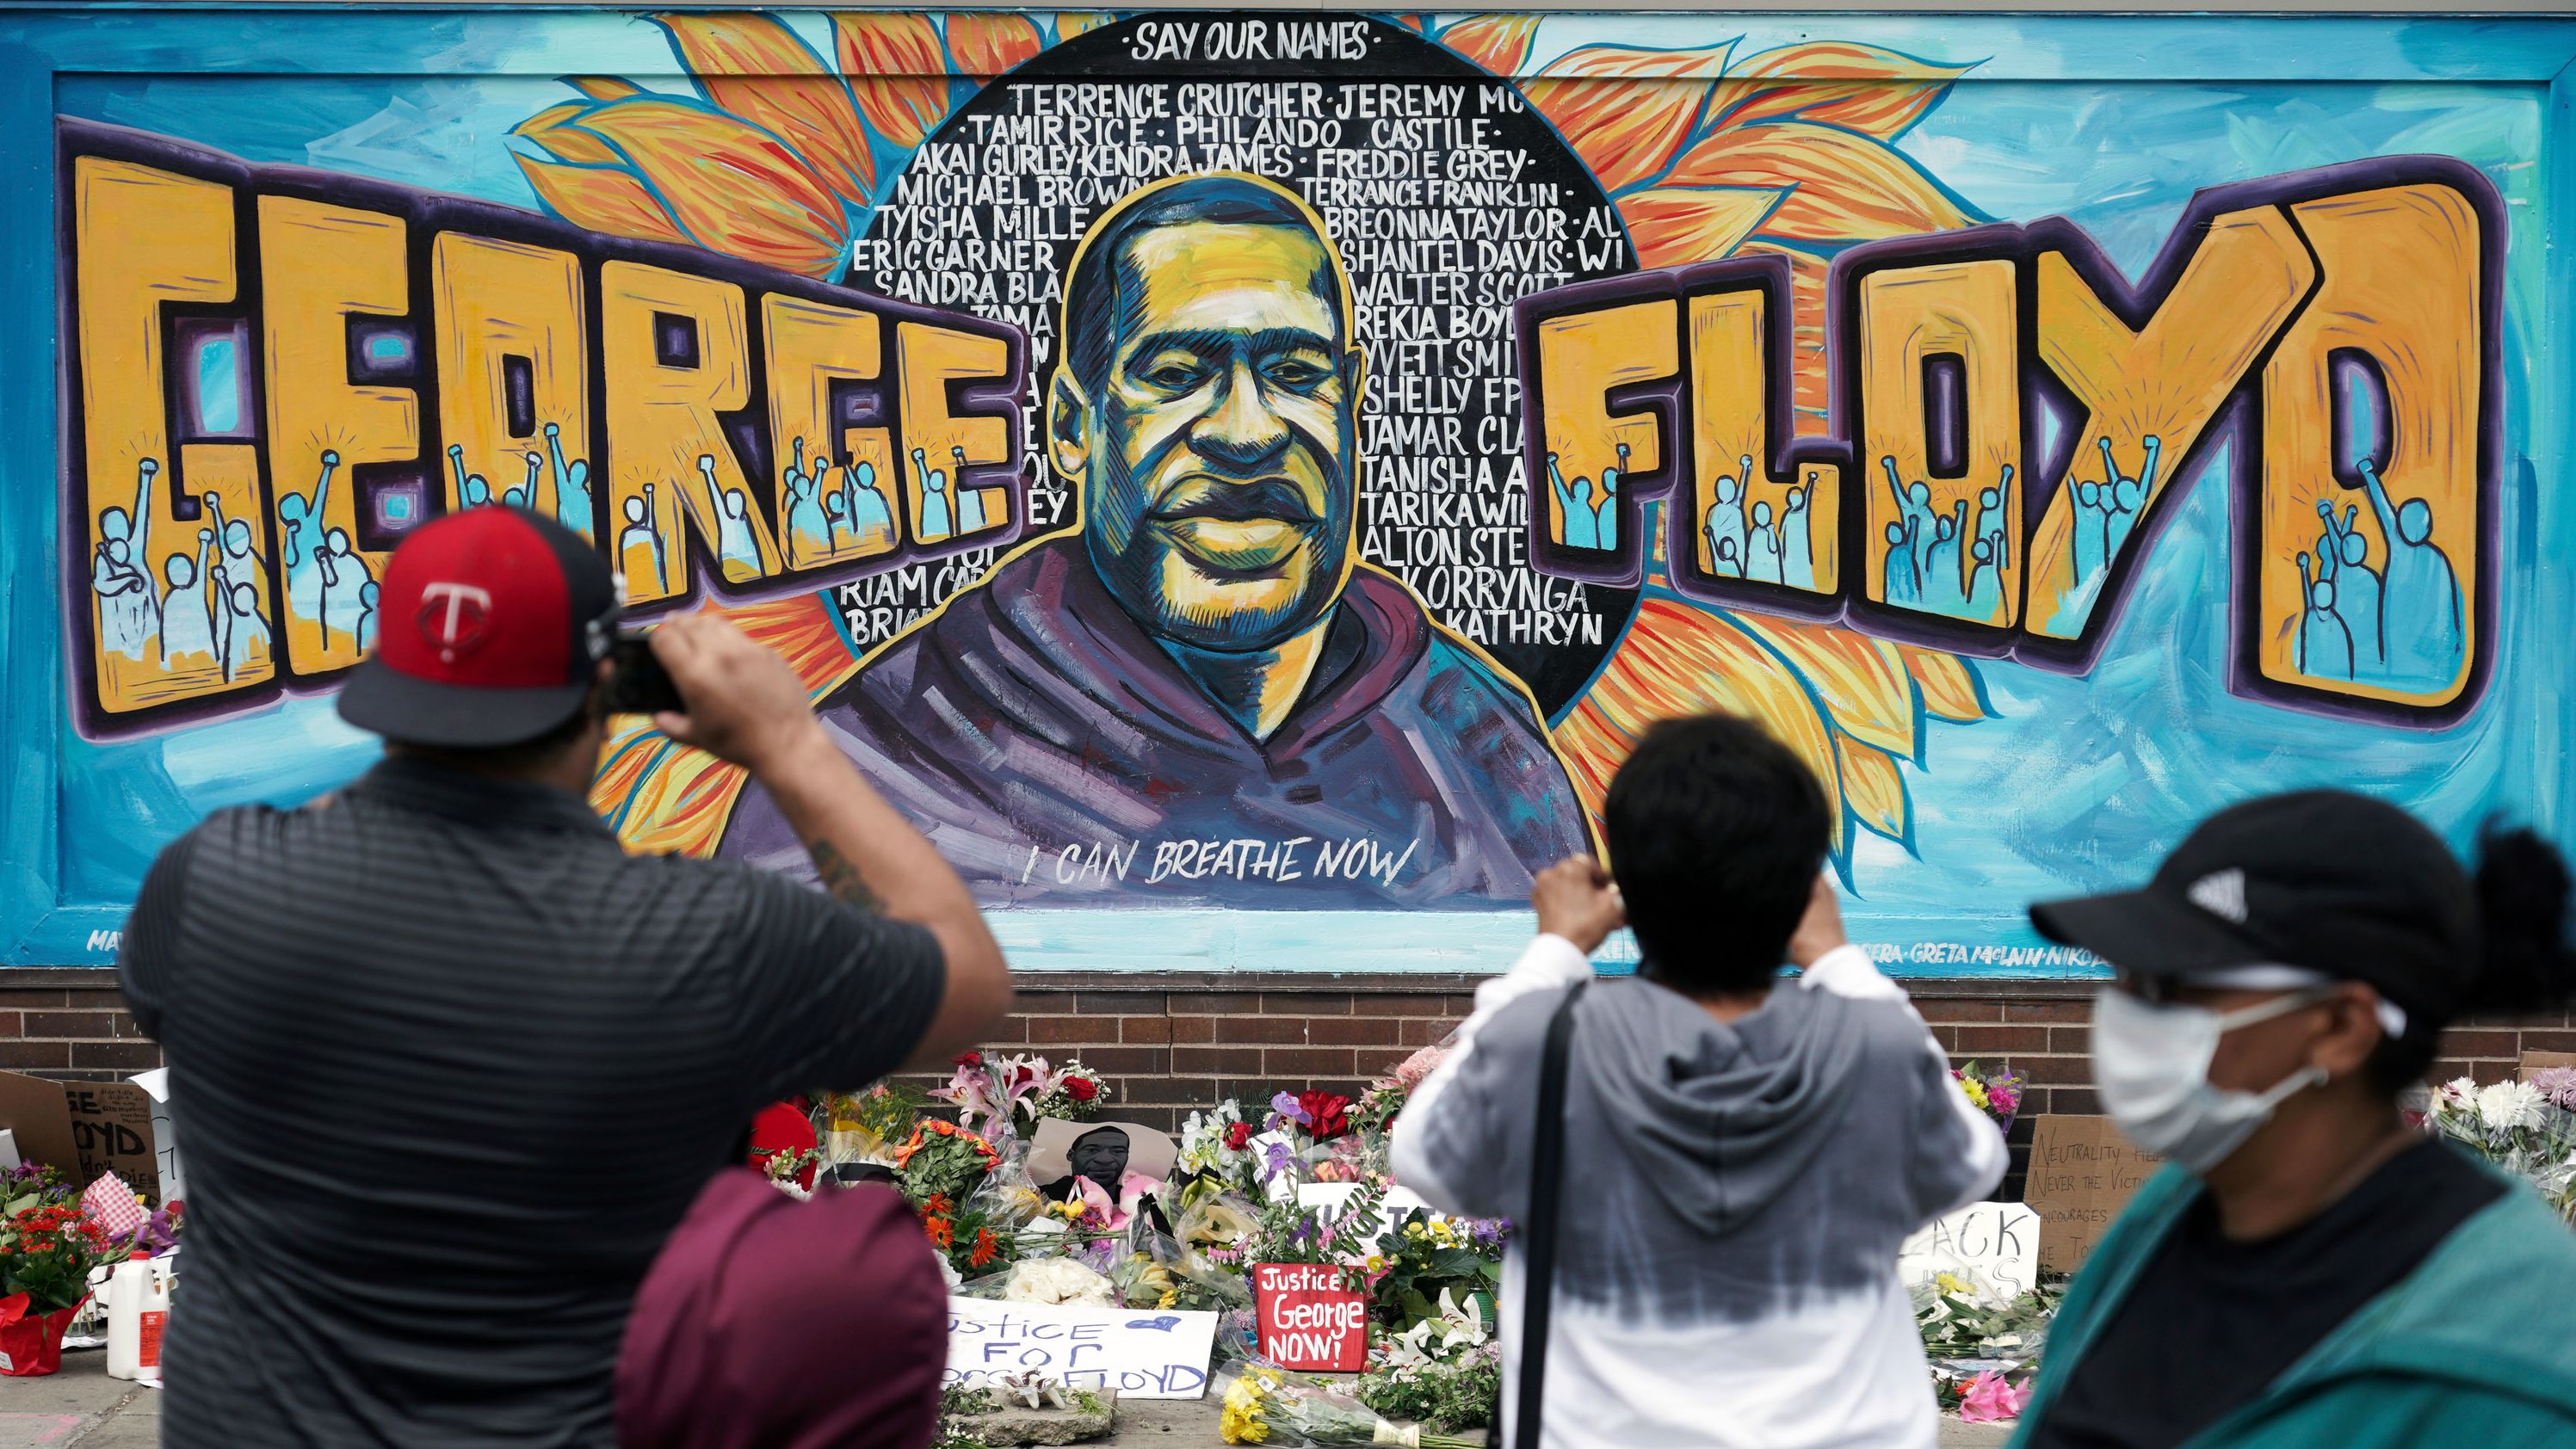 People gather at a George Floyd mural in Minneapolis on May 29. <a href="https://www.cnn.com/style/article/george-floyd-mural-social-justice-art/index.html" target="_blank">The mural</a> was painted by Greta McLain, Xena Goldman and Cadex Herrera at the spot where Floyd was killed.